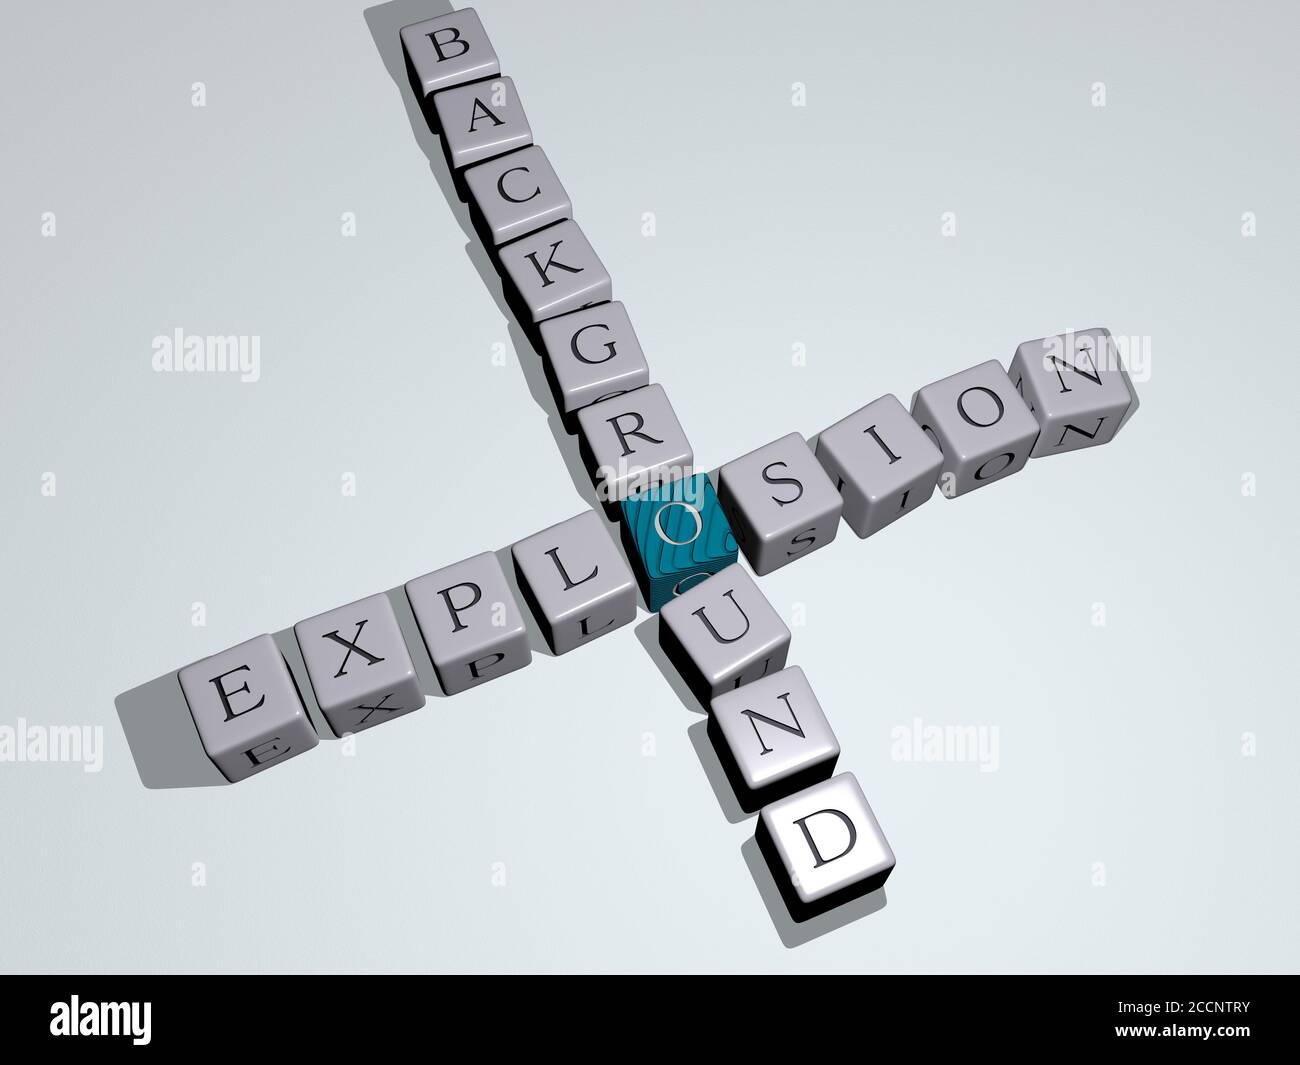 EXPLOSION BACKGROUND crossword by cubic dice letters 3D illustration